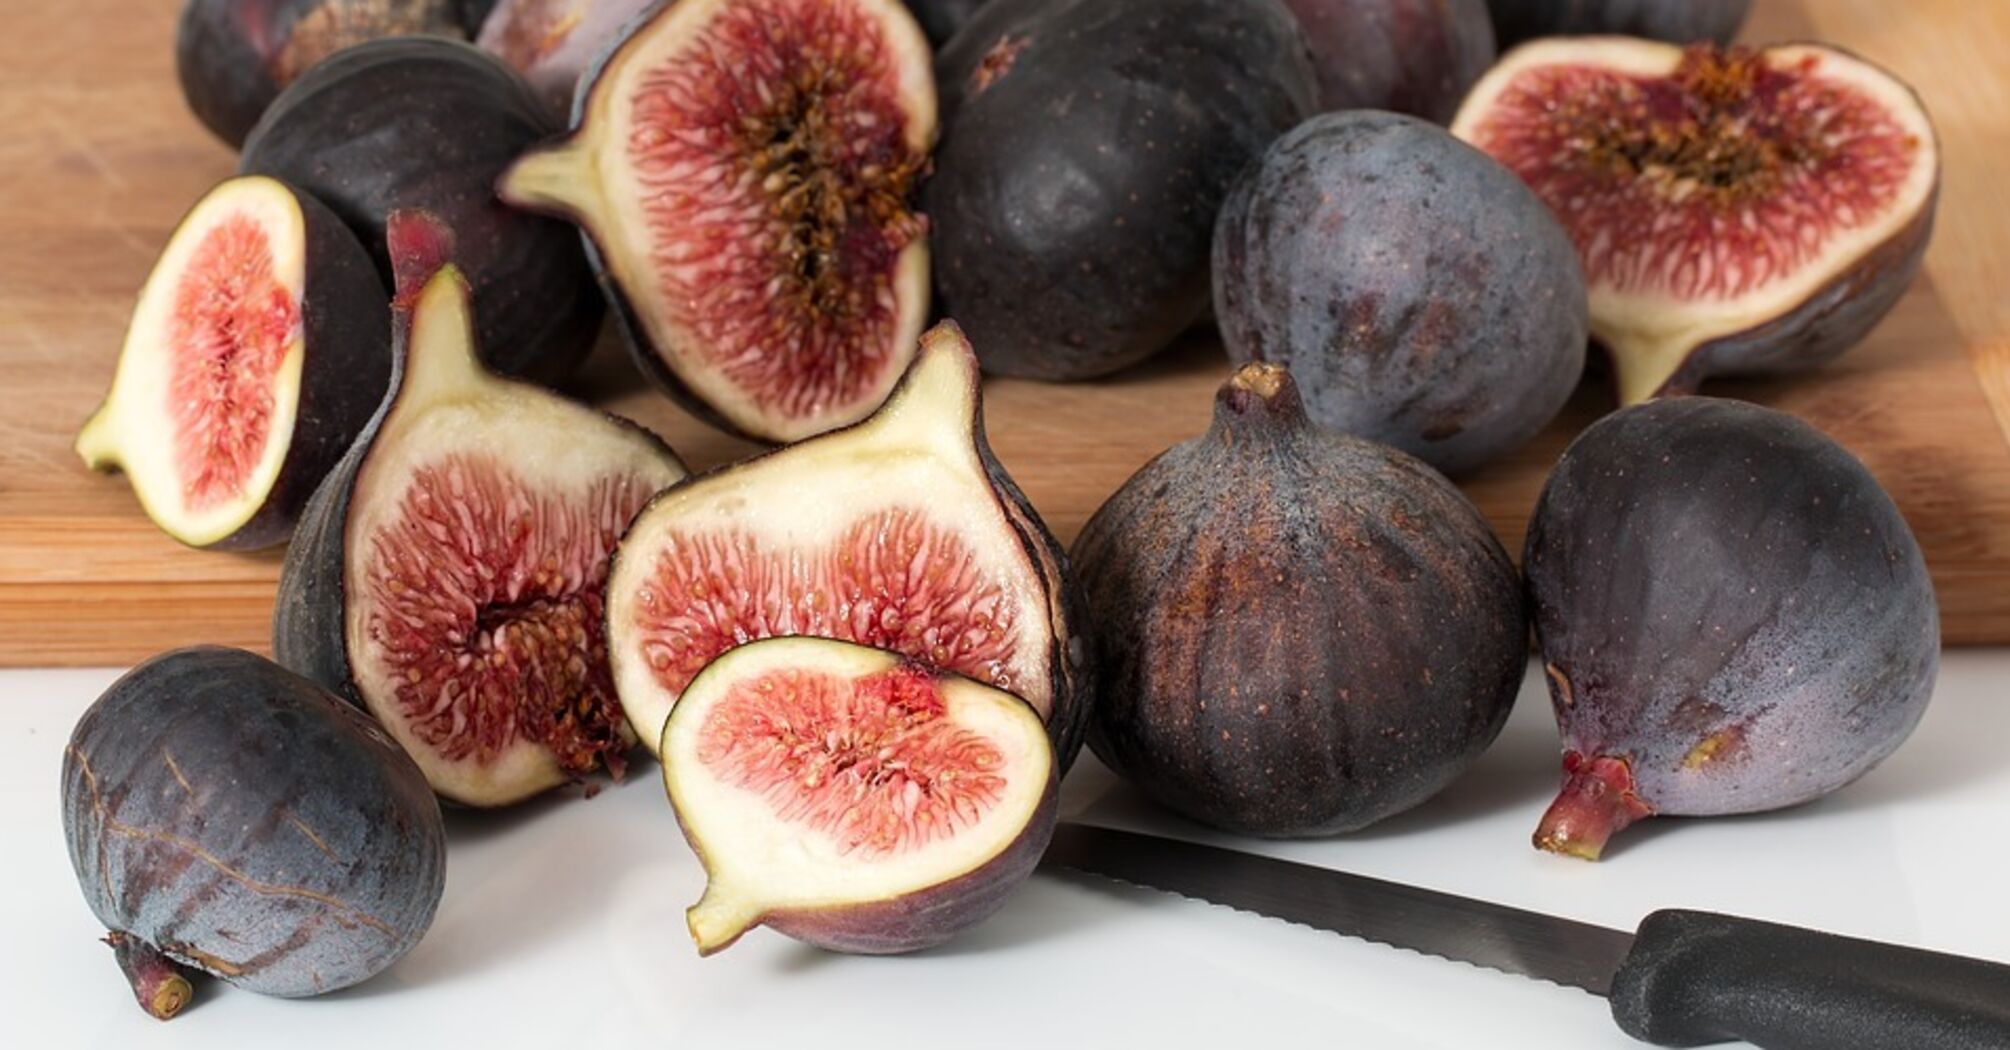 Figs will decorate any dish – exotic combinations of fruit